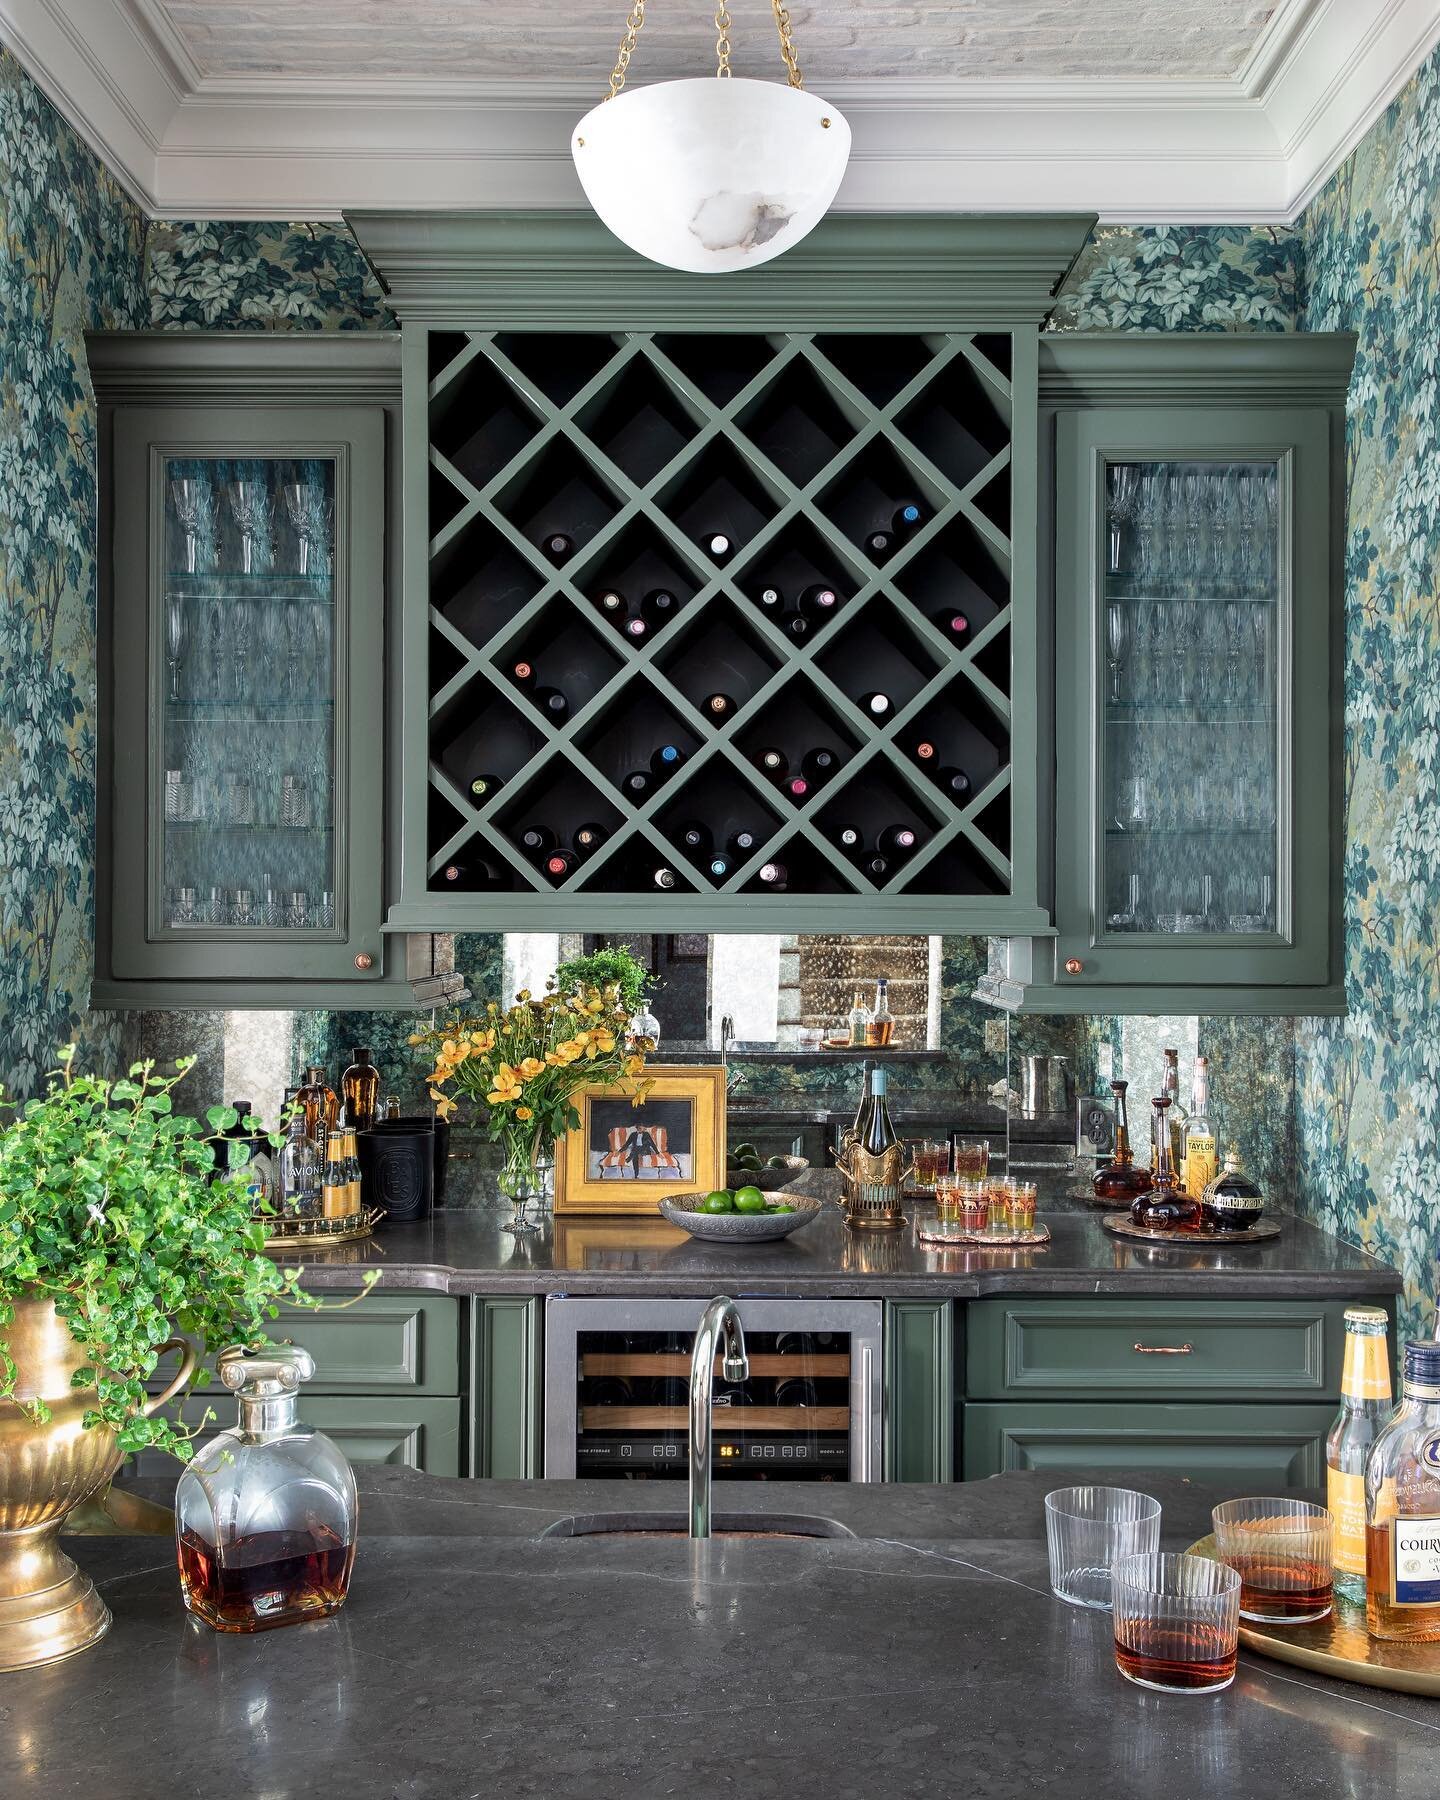 This jewel box of a bar got a complete refresh from paint, backsplash, countertops, and lighting to that killer wallpaper. Thank you @wileyhomesllc for helping us make it all happen! ⚡️💚🥃 photo: @kerrykirkphoto styling: @curiousdetails